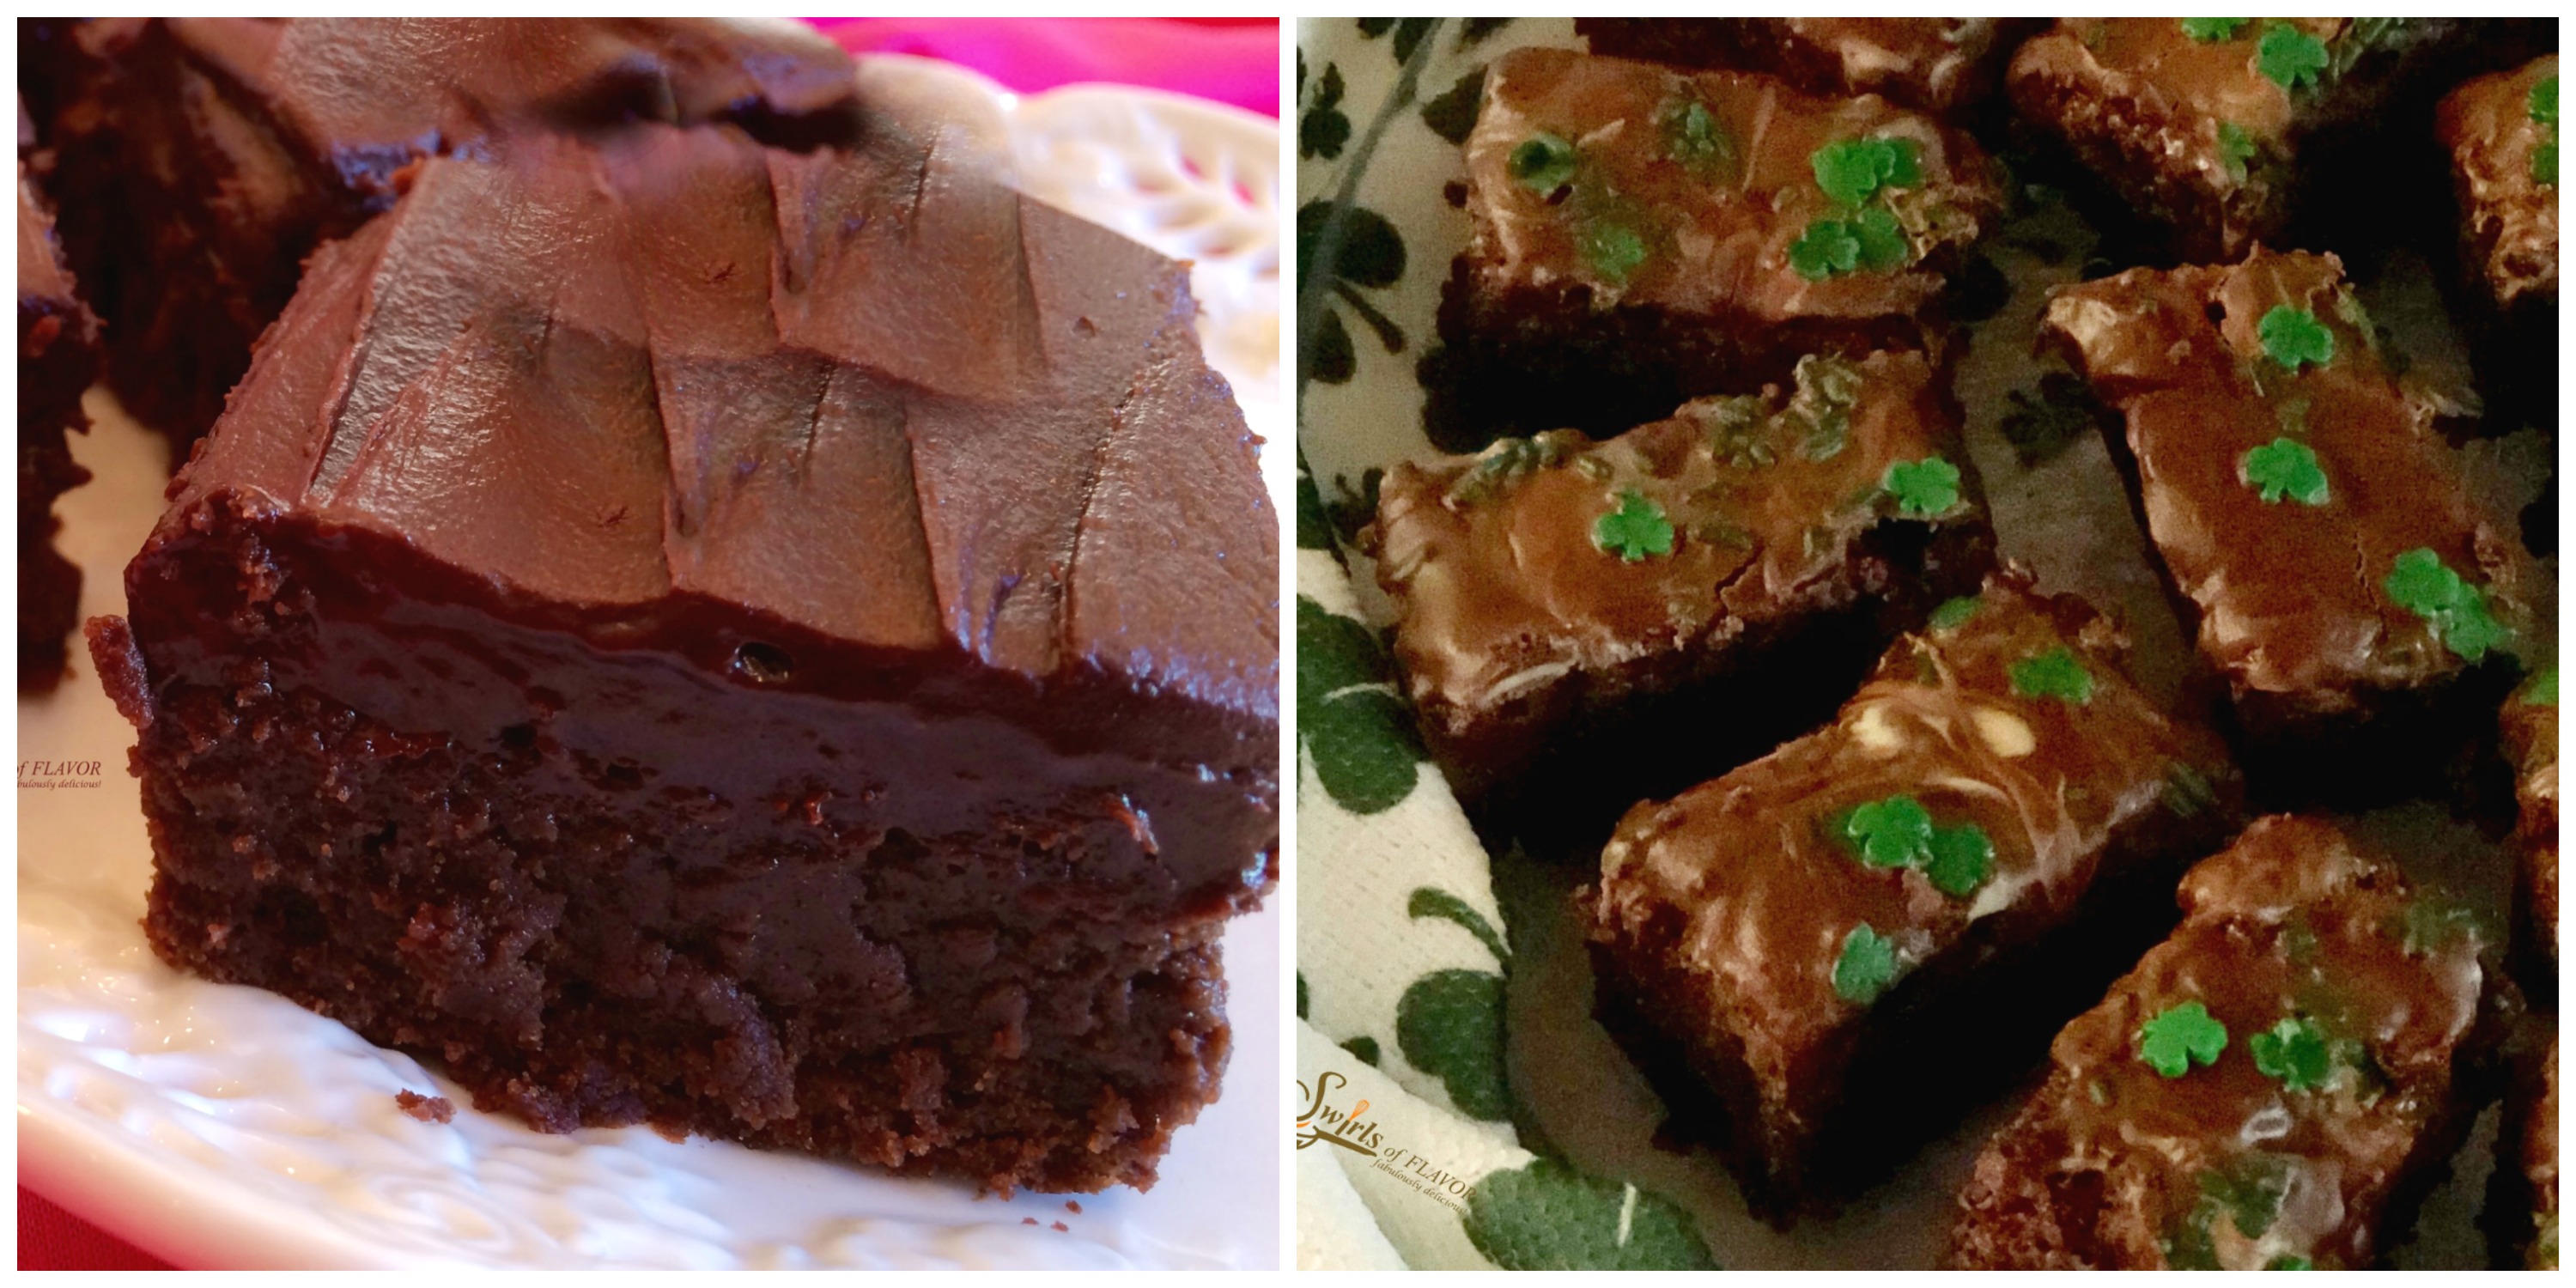 Espresso Brownies and Chocolate Chip Mint Brownies